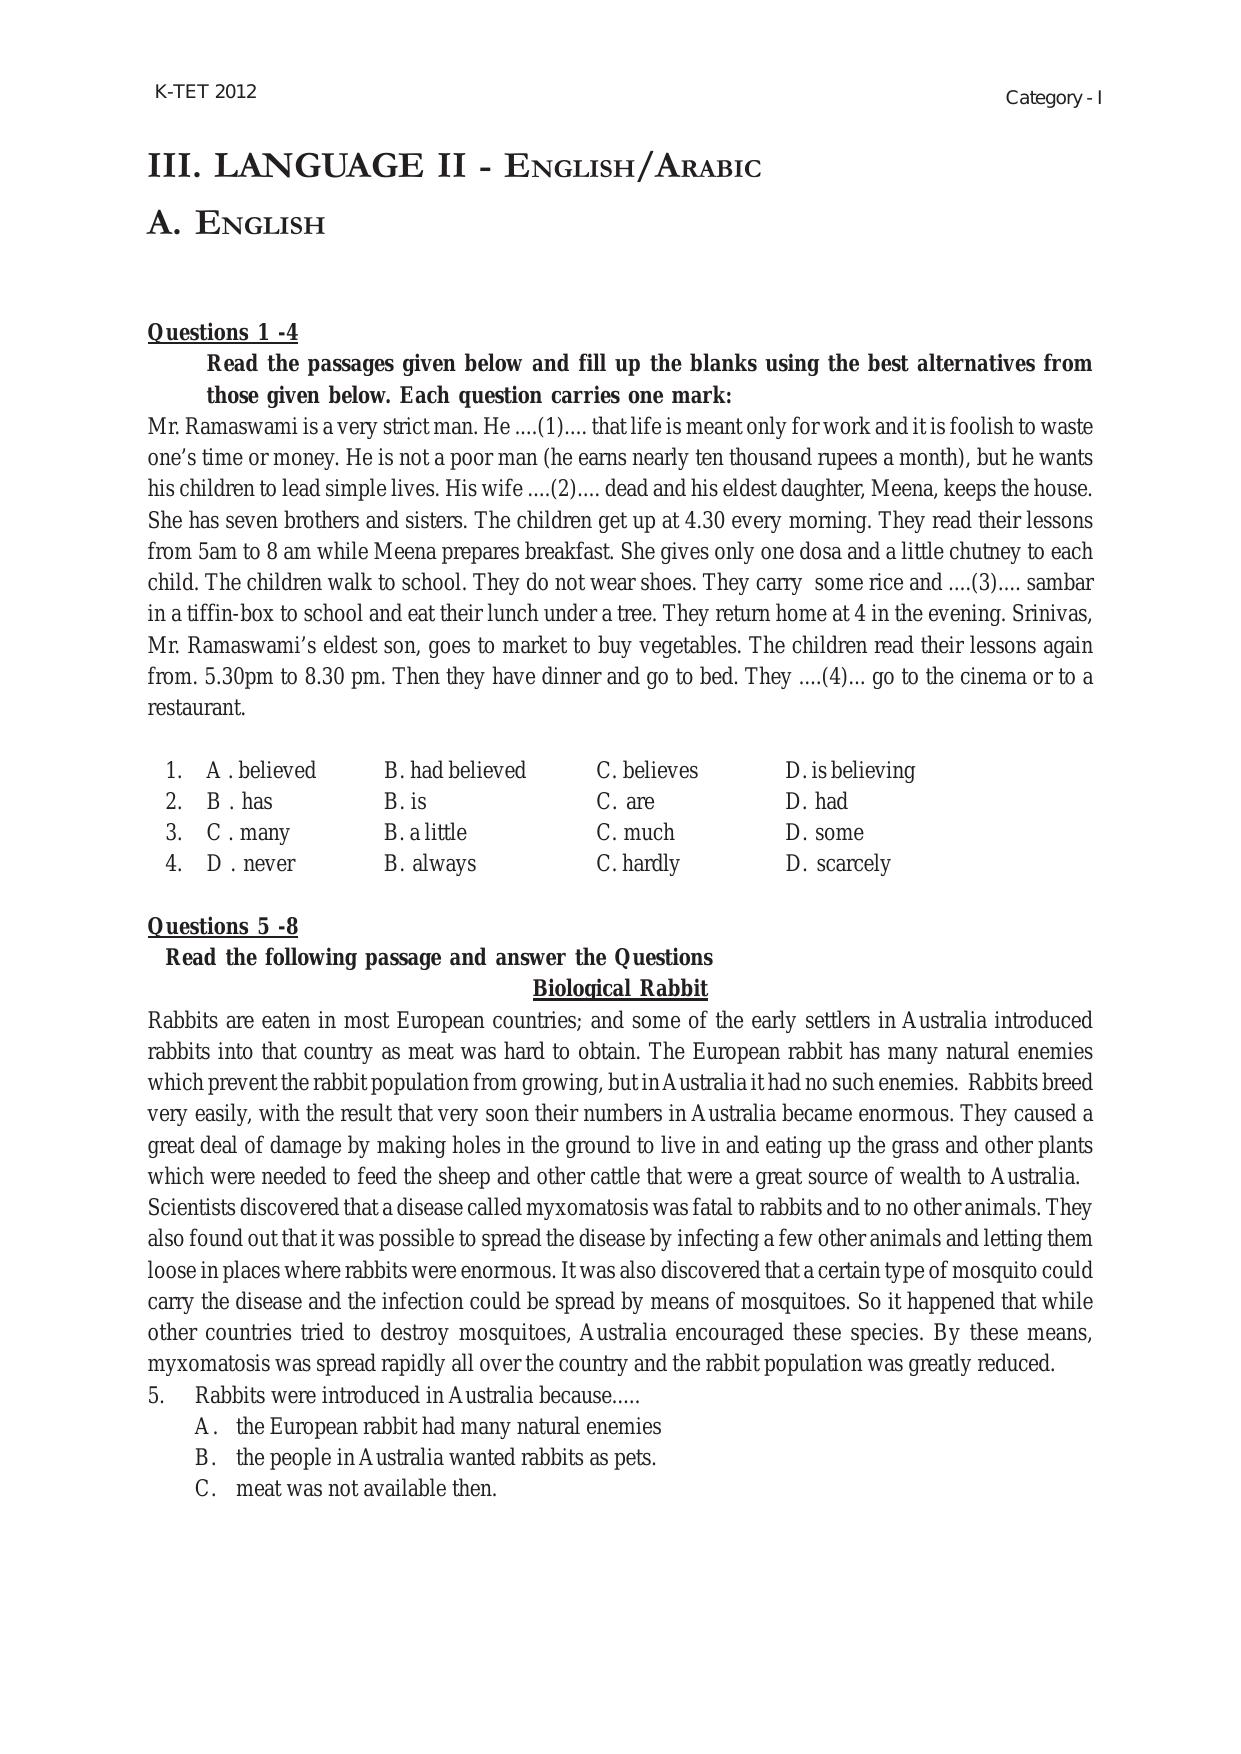 KTET Category 1 - Lower Primary Teacher (Class 1-5) Exam Old Papers - Page 8